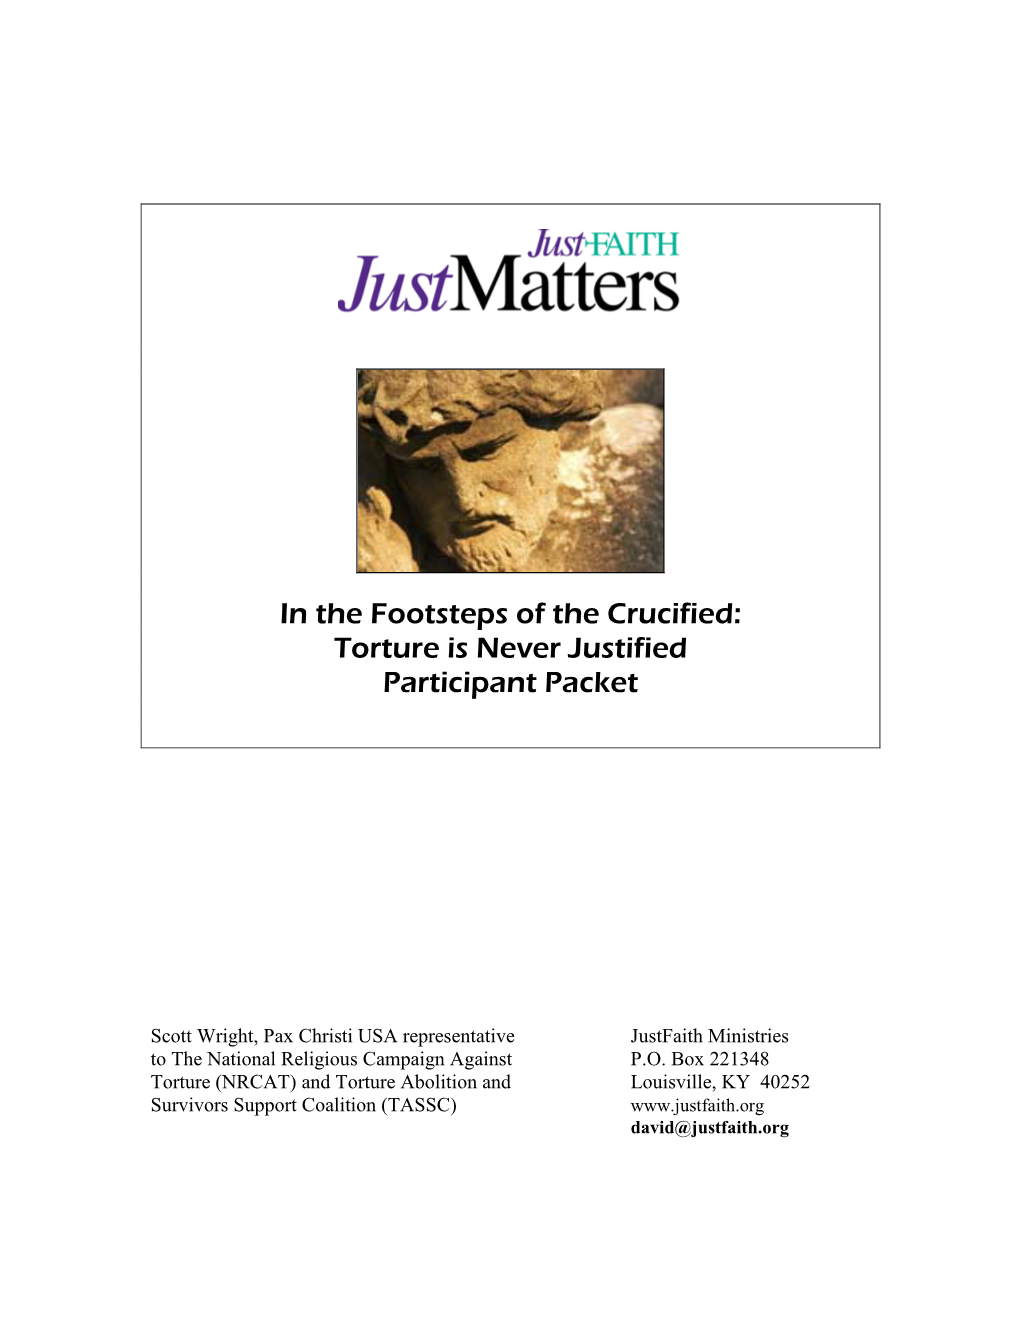 In the Footsteps of the Crucified: Torture Is Never Justified Participant Packet